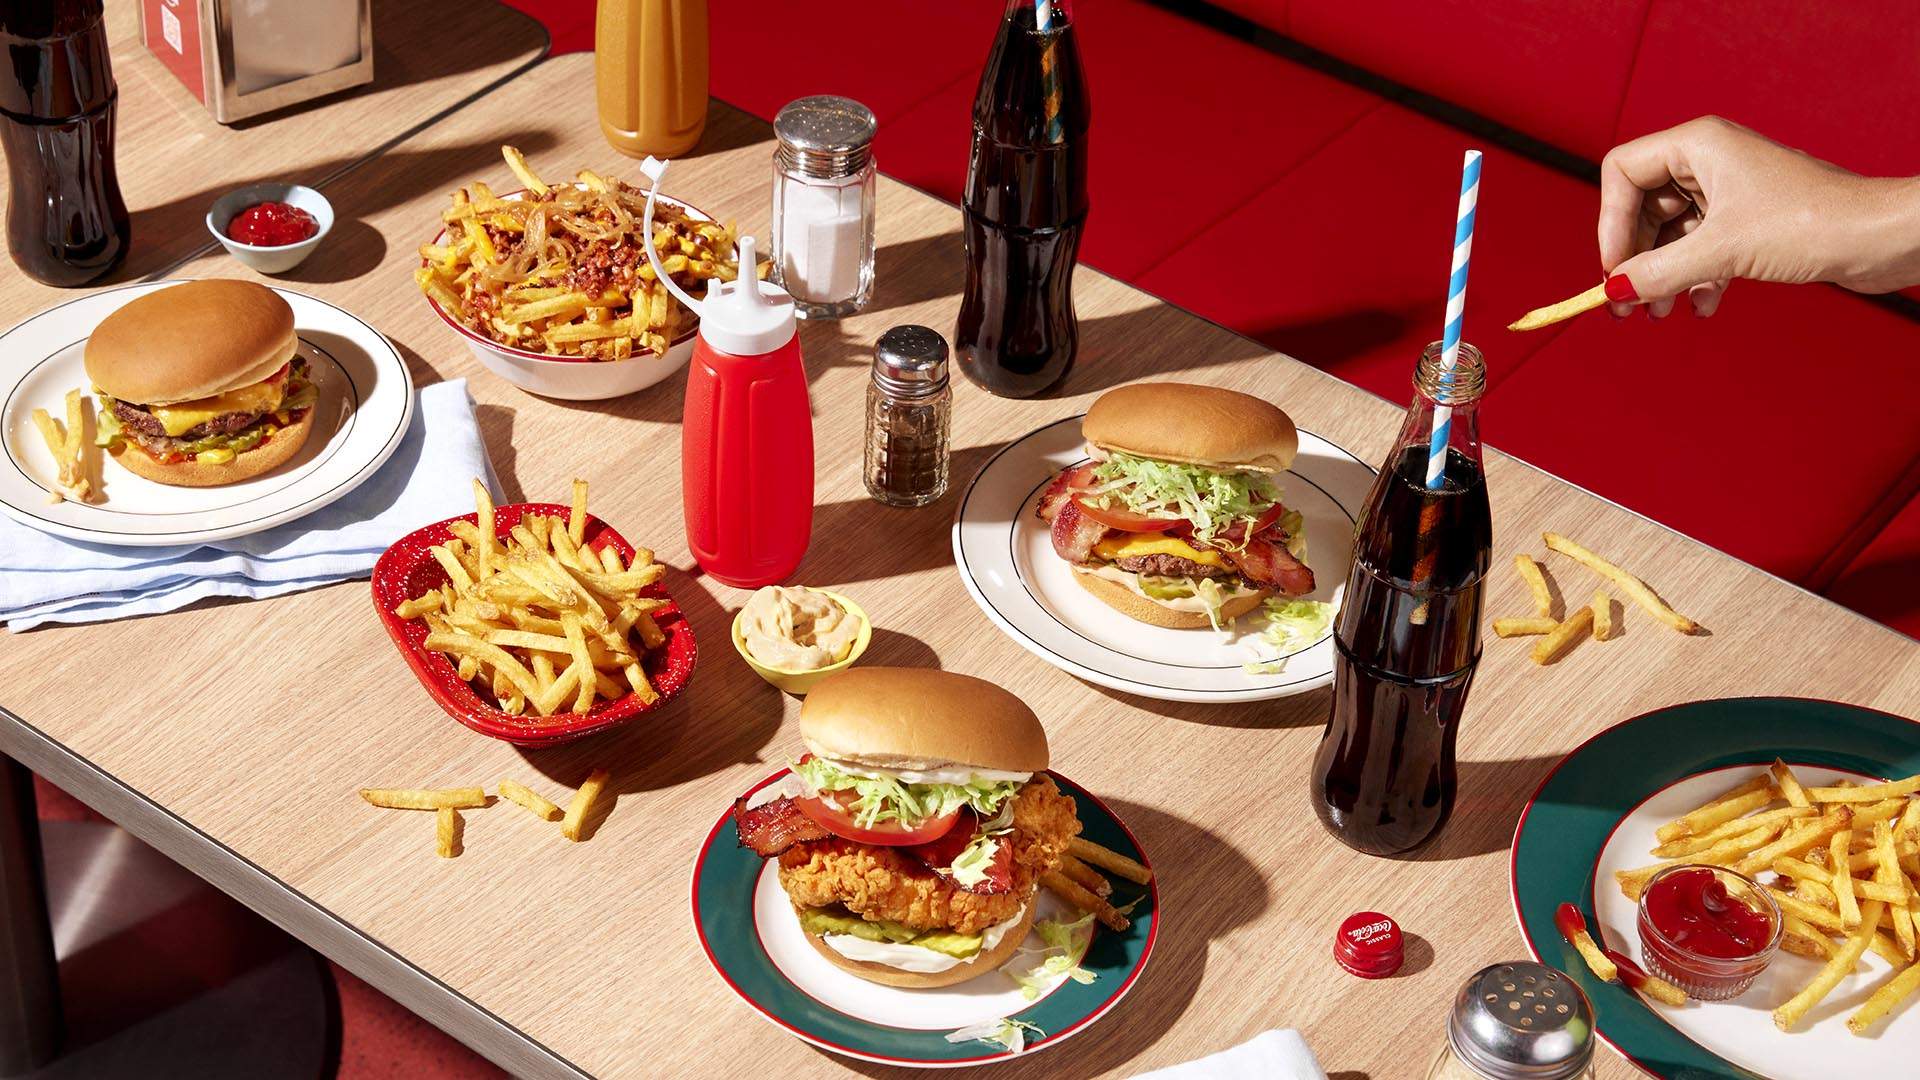 Now Open: Slim's Quality Burger Has Arrived in Brisbane with Its First Retro-Themed Drive-Thru Diner